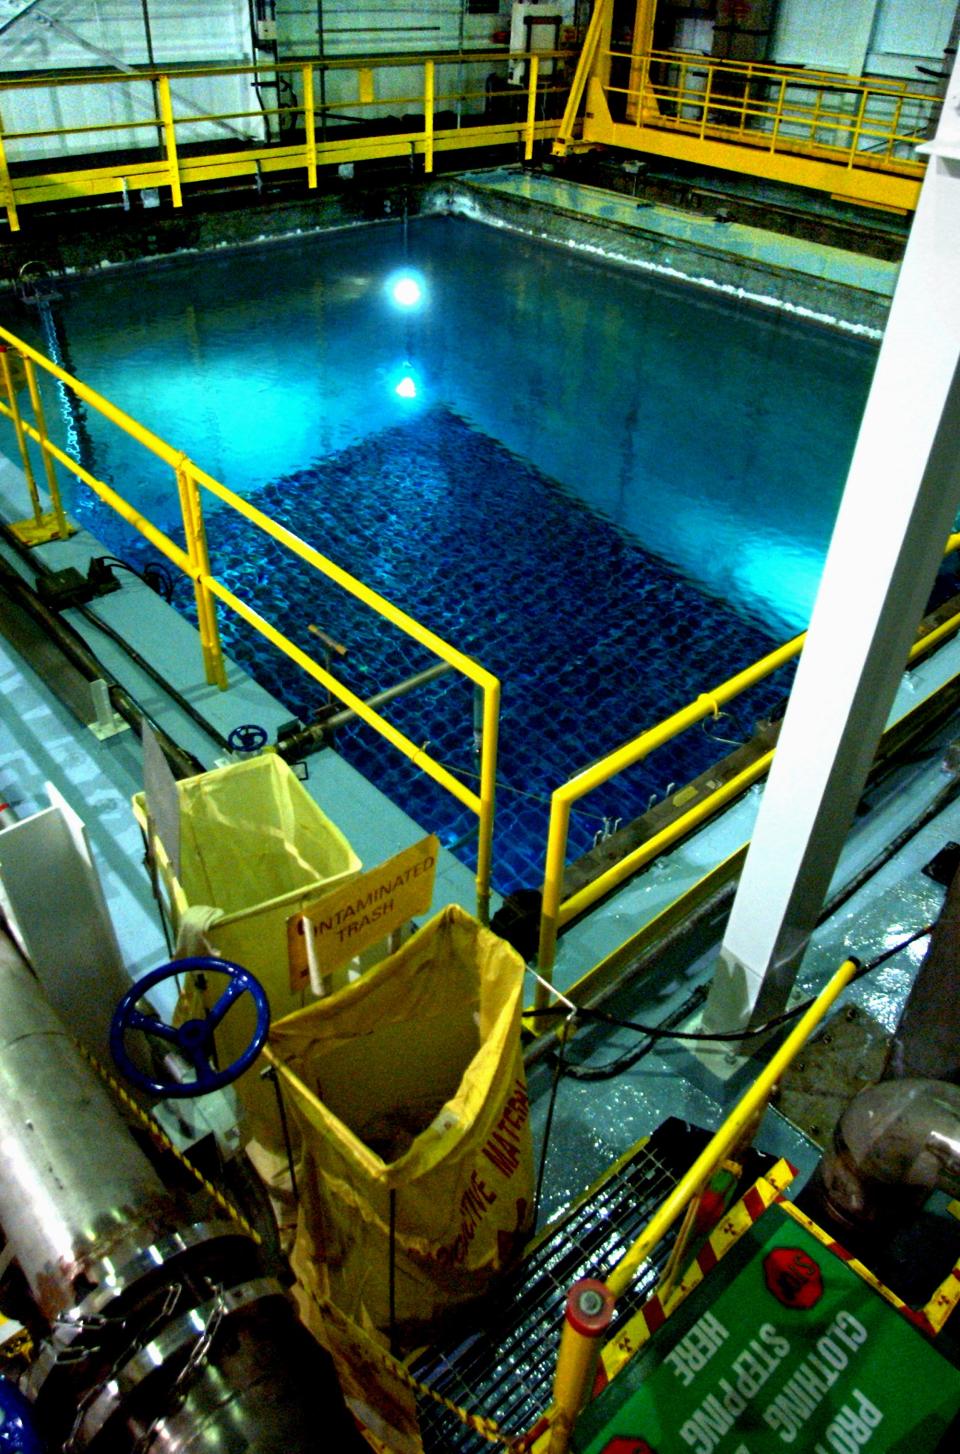 A spent fuel pool at the Indian Point nuclear plant in Buchanan, N.Y. shows uranium rods submerged in 23 feet of water. The stored rods came out of the nuclear reactor. 